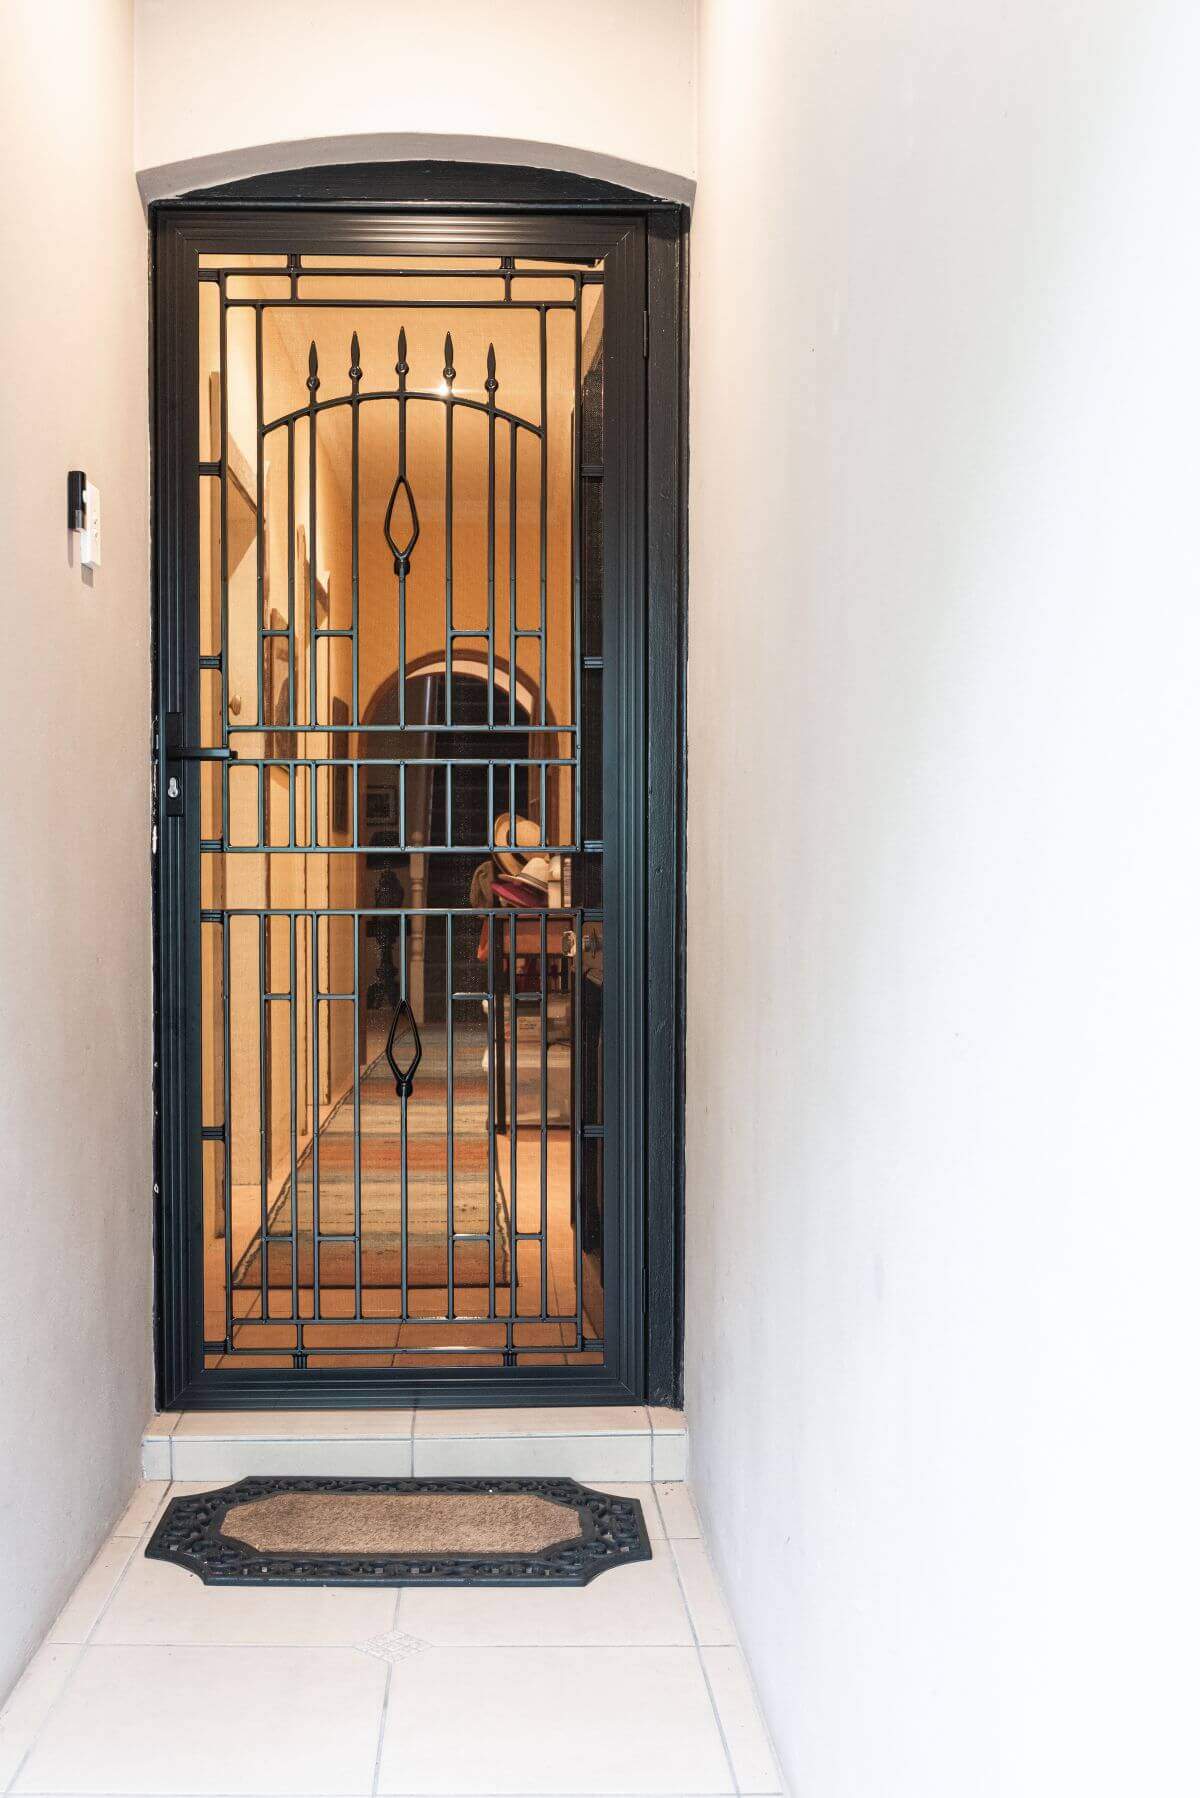 Doors Plus-External-Entrance-Nubreeze-Safety screen door-with grill design on it-in black finish-with hardware